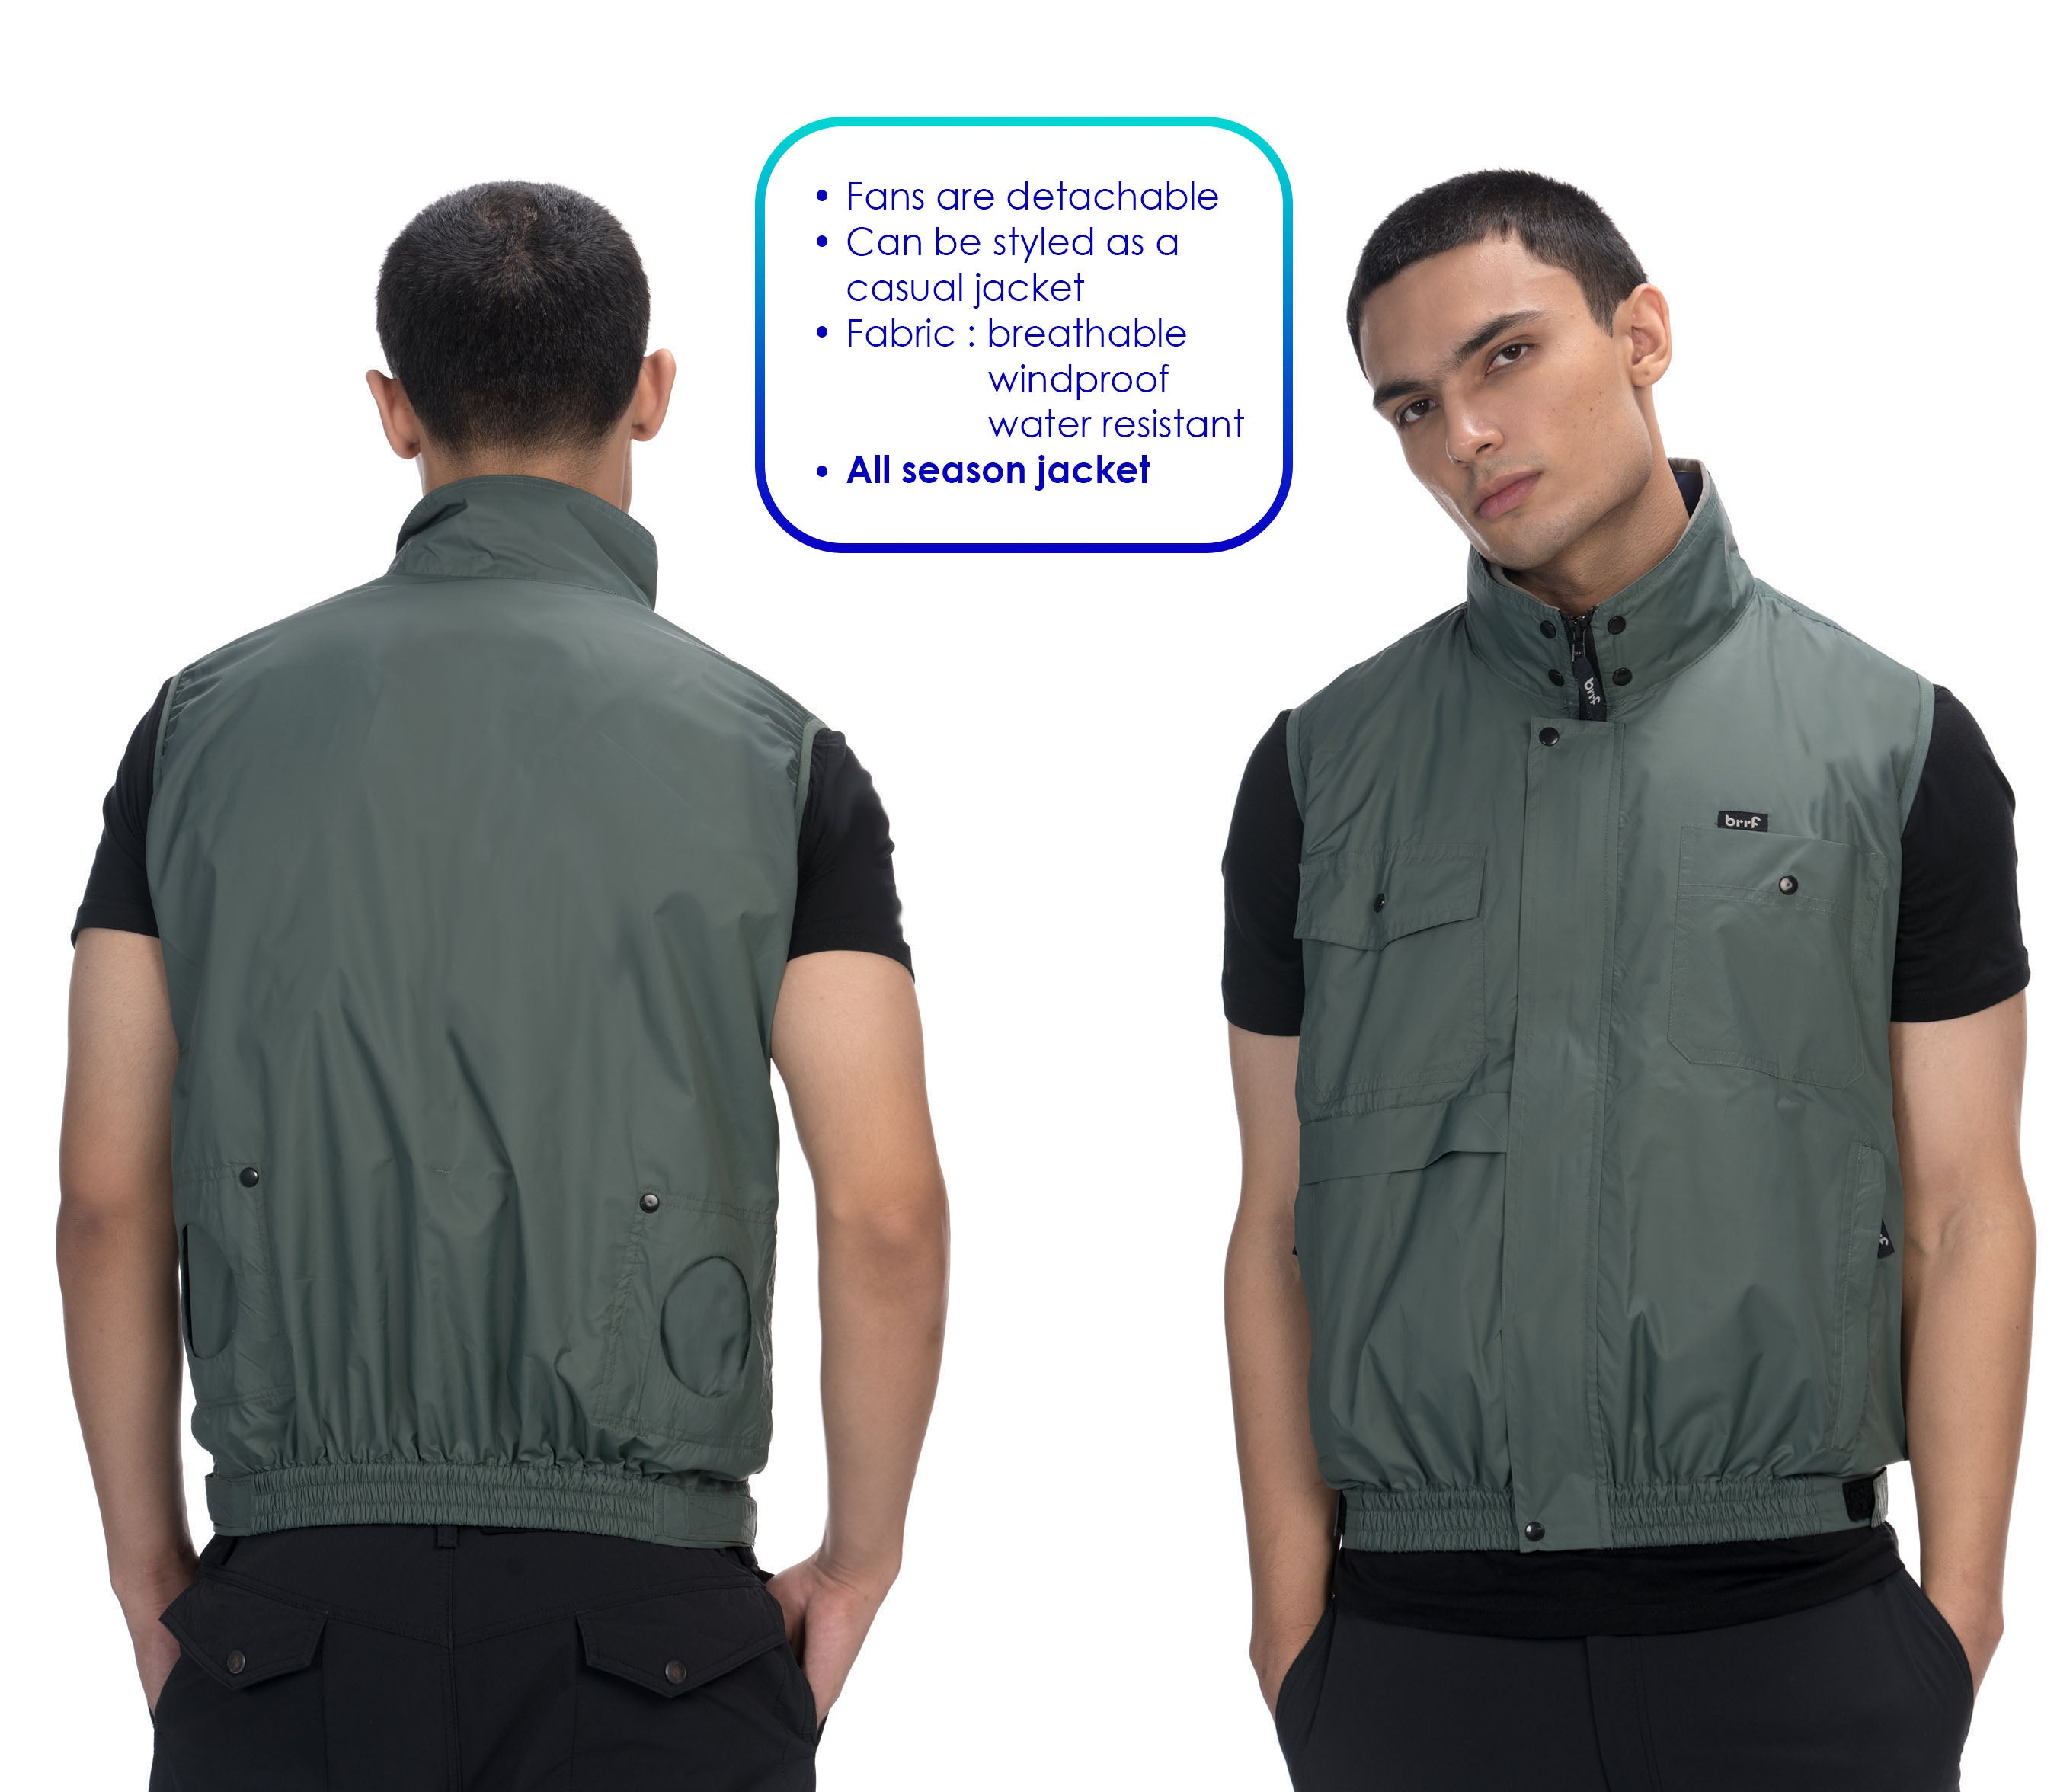 Air-Conditioned Clothing - Utility Style -brrf basic (with 10,000 mAh Powerbank included)